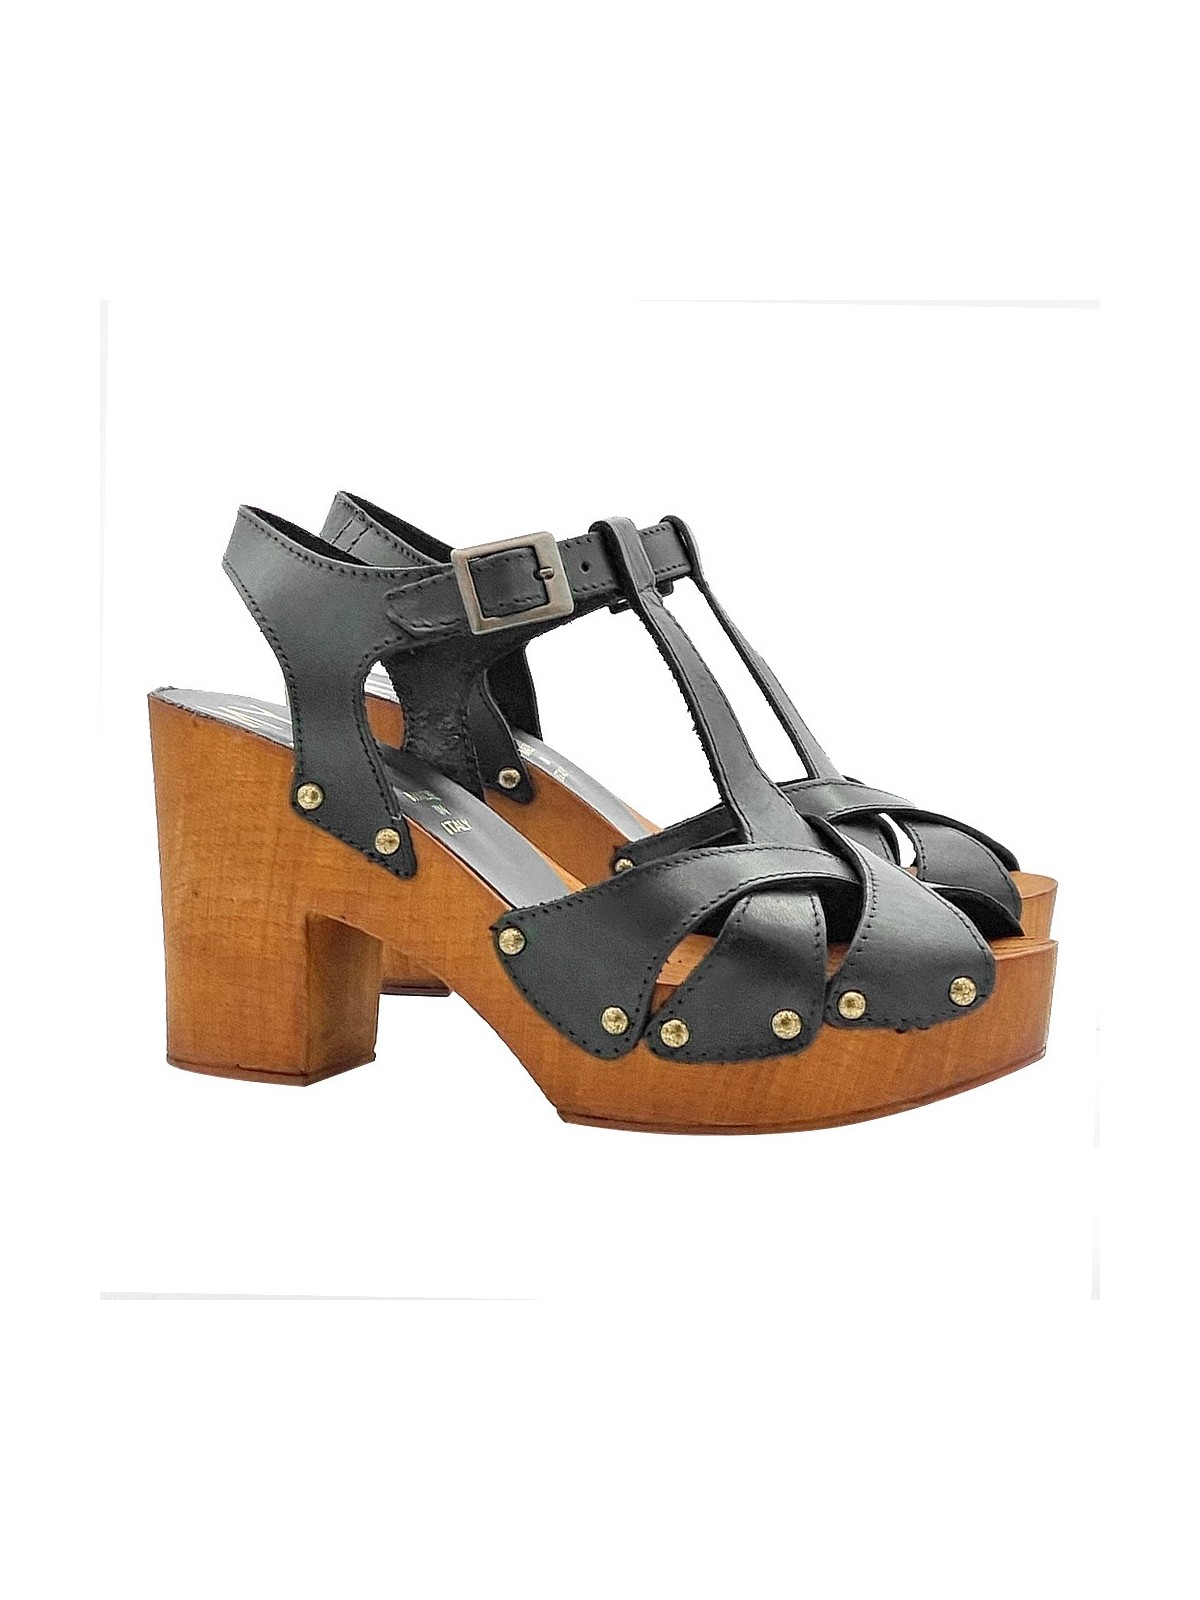 BLACK LEATHER SANDALS WITH CROSSED BANDS